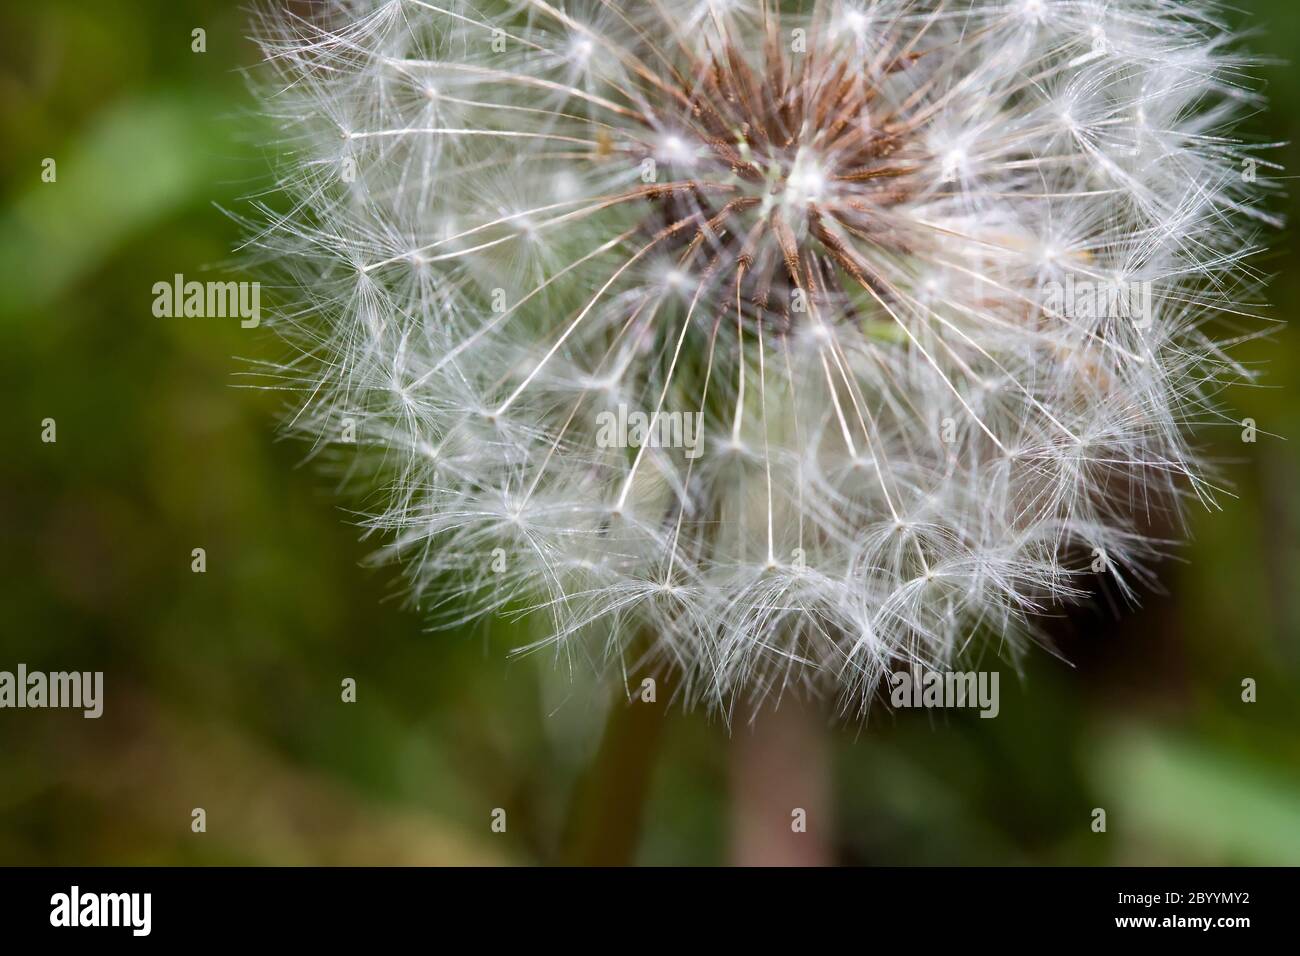 Dandelion gone to Seed Stock Photo